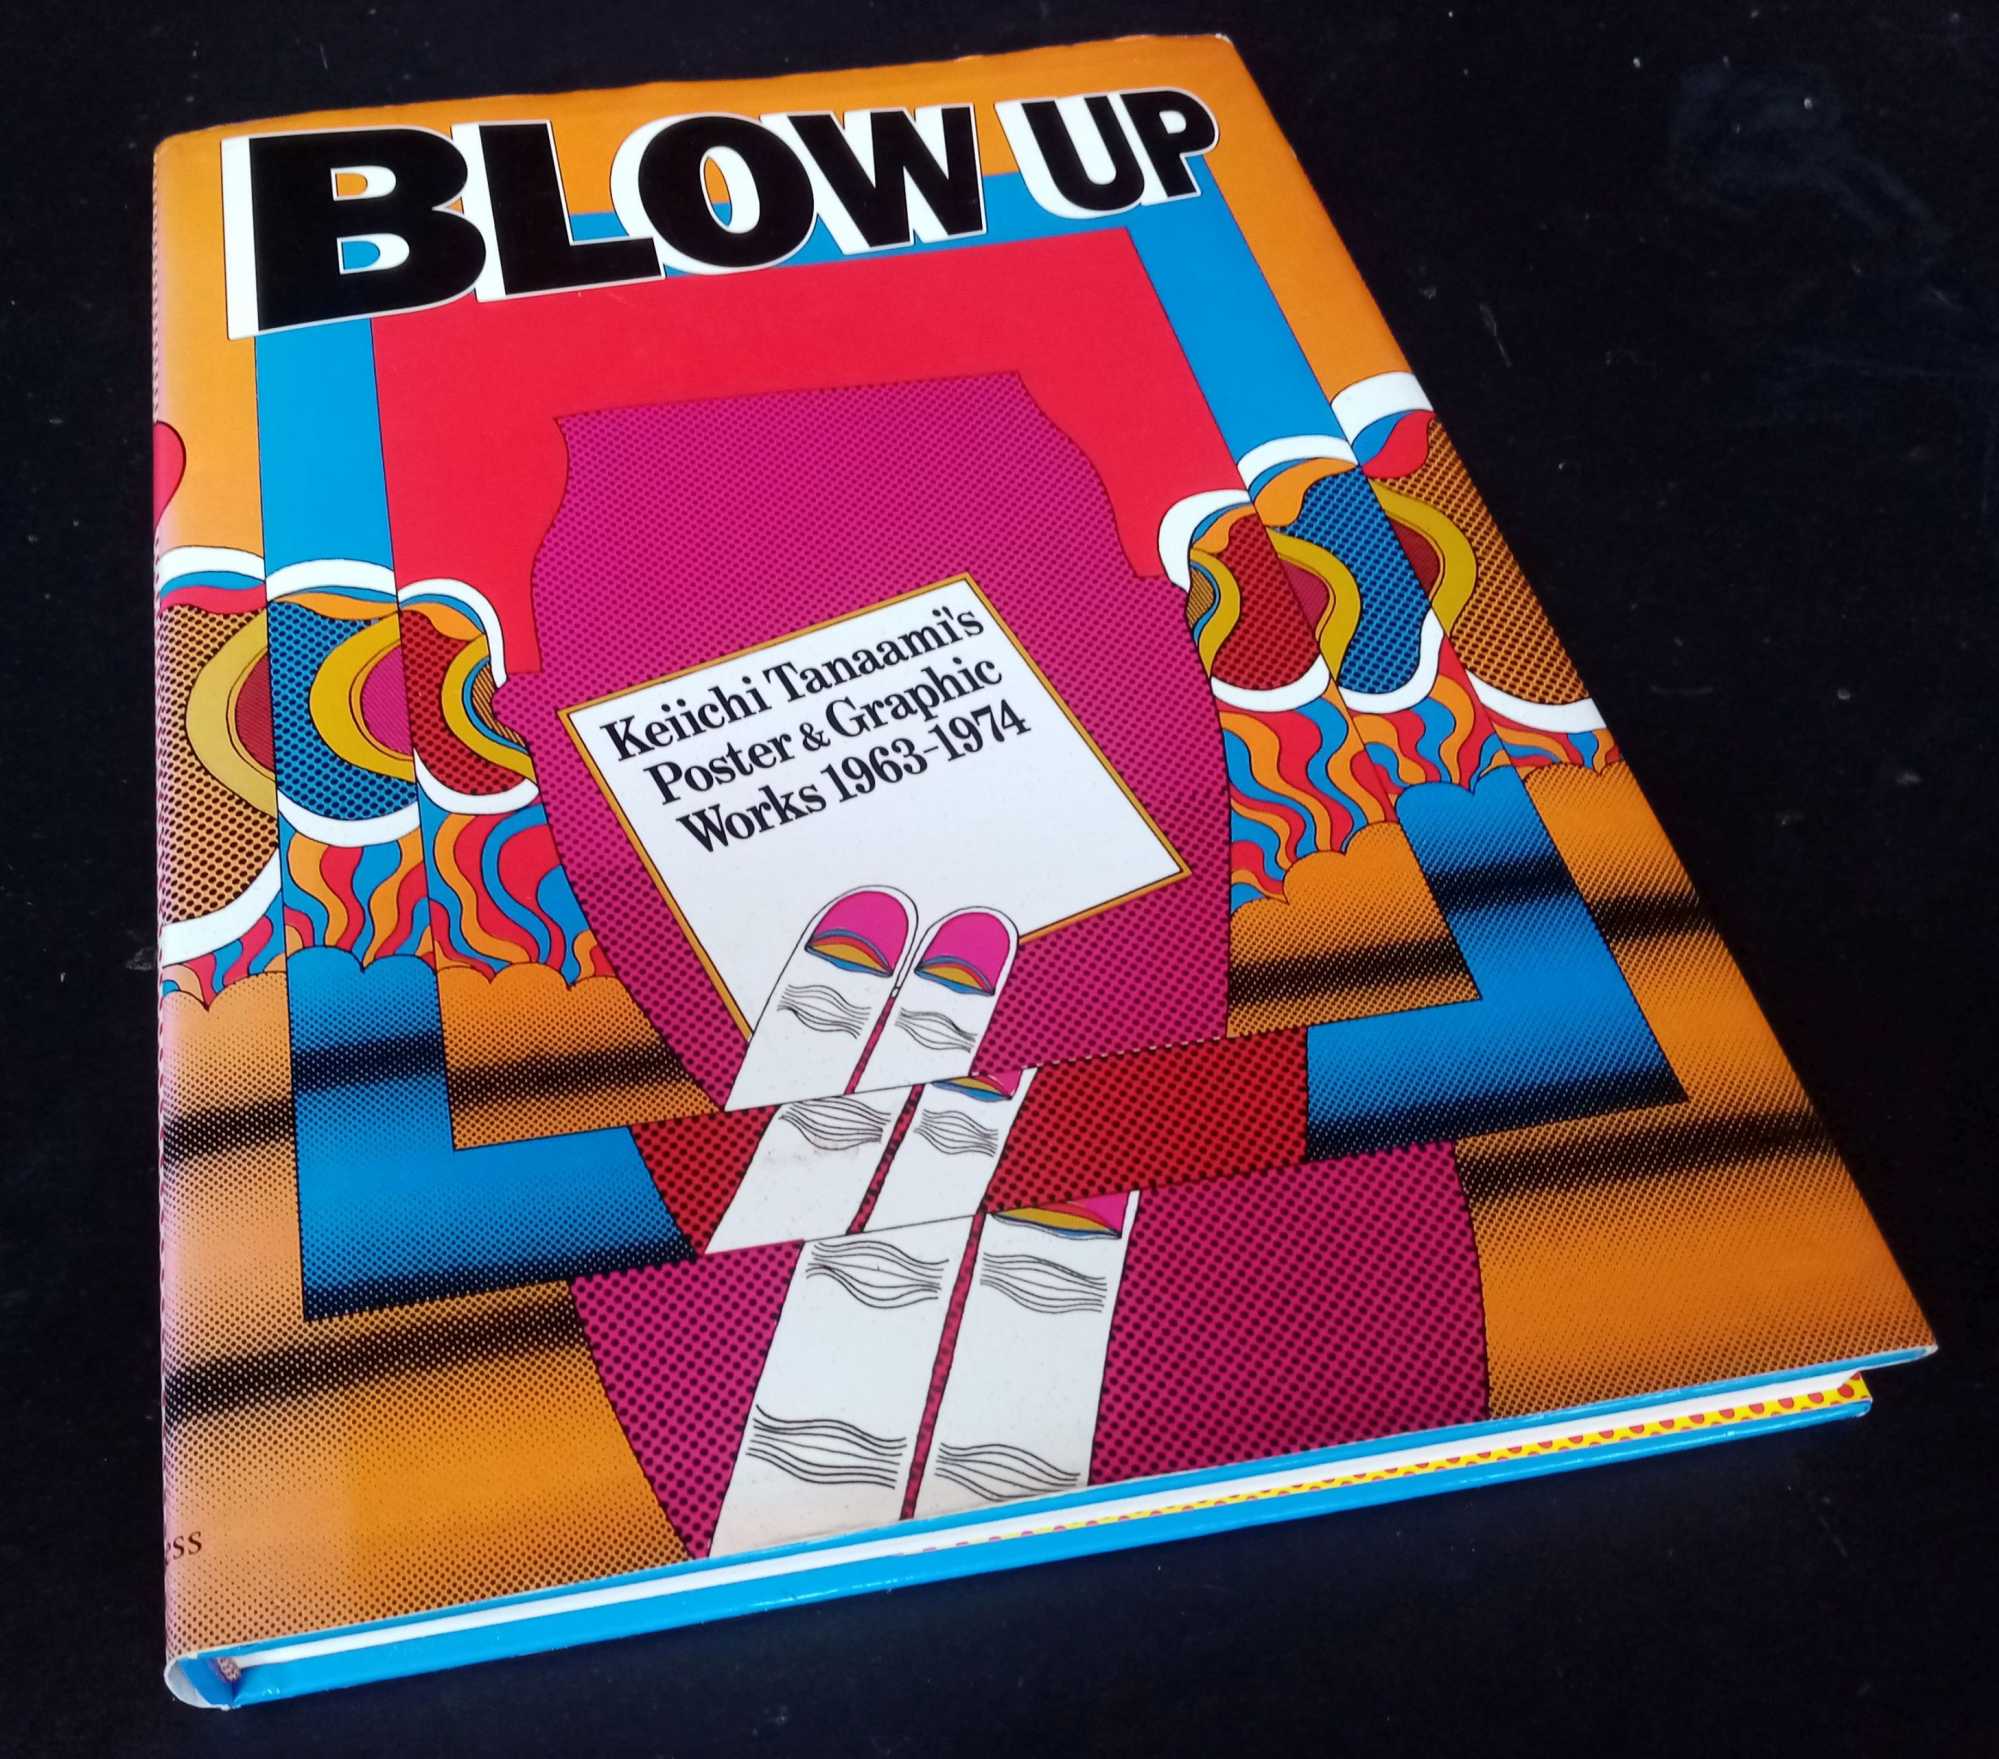 . - Blow Up: Keiichi Tanaami: Poster and Graphic Works 1963-1974